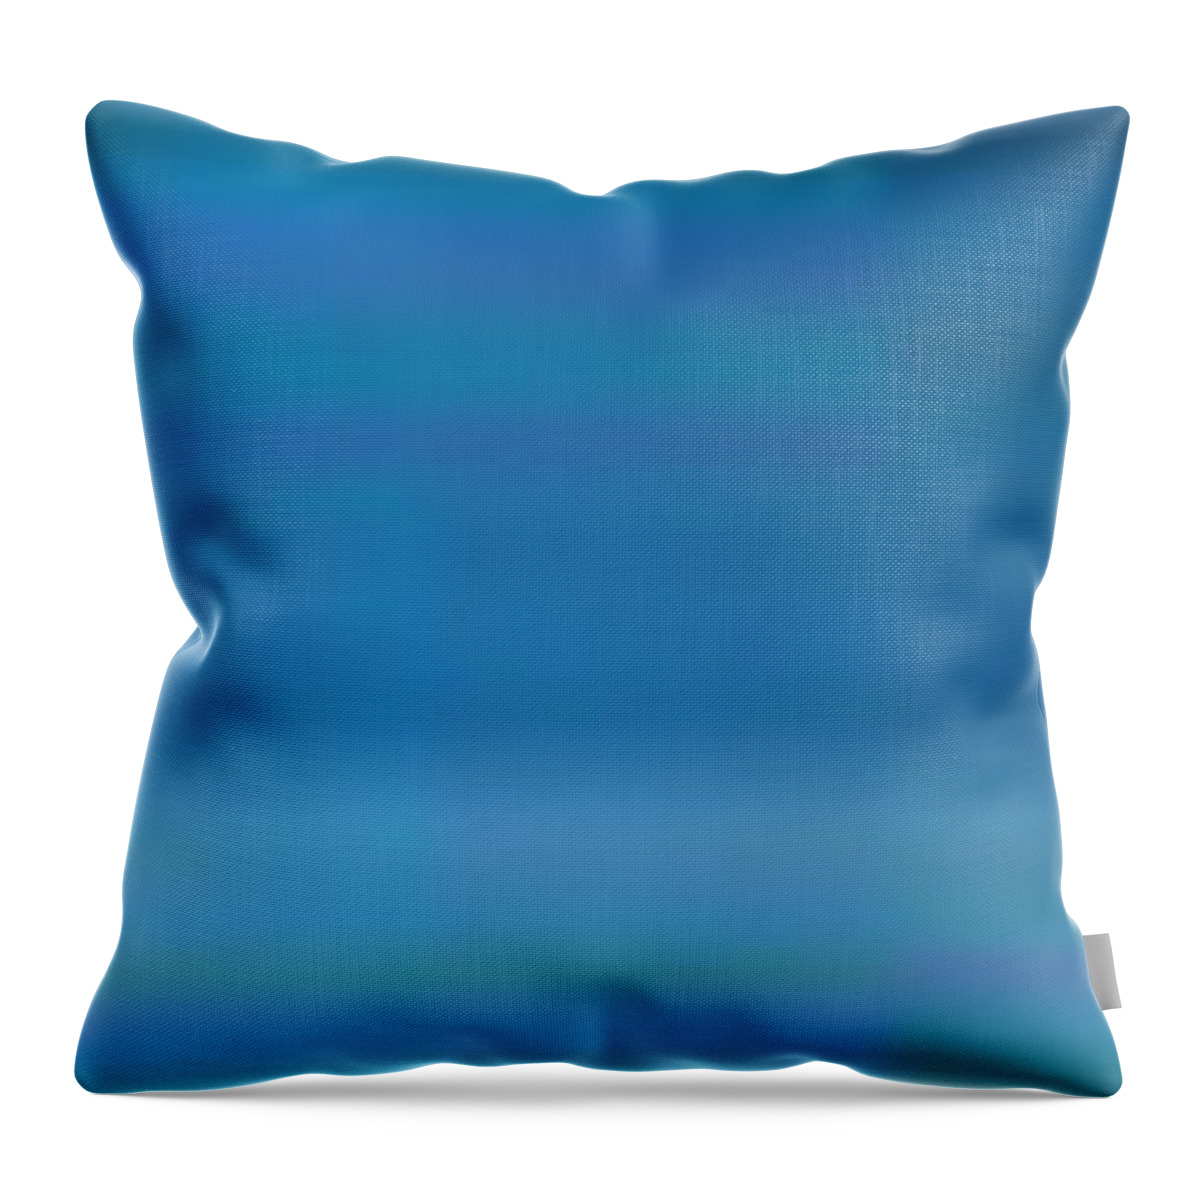 Oil Throw Pillow featuring the painting Blue Angular by Matteo TOTARO